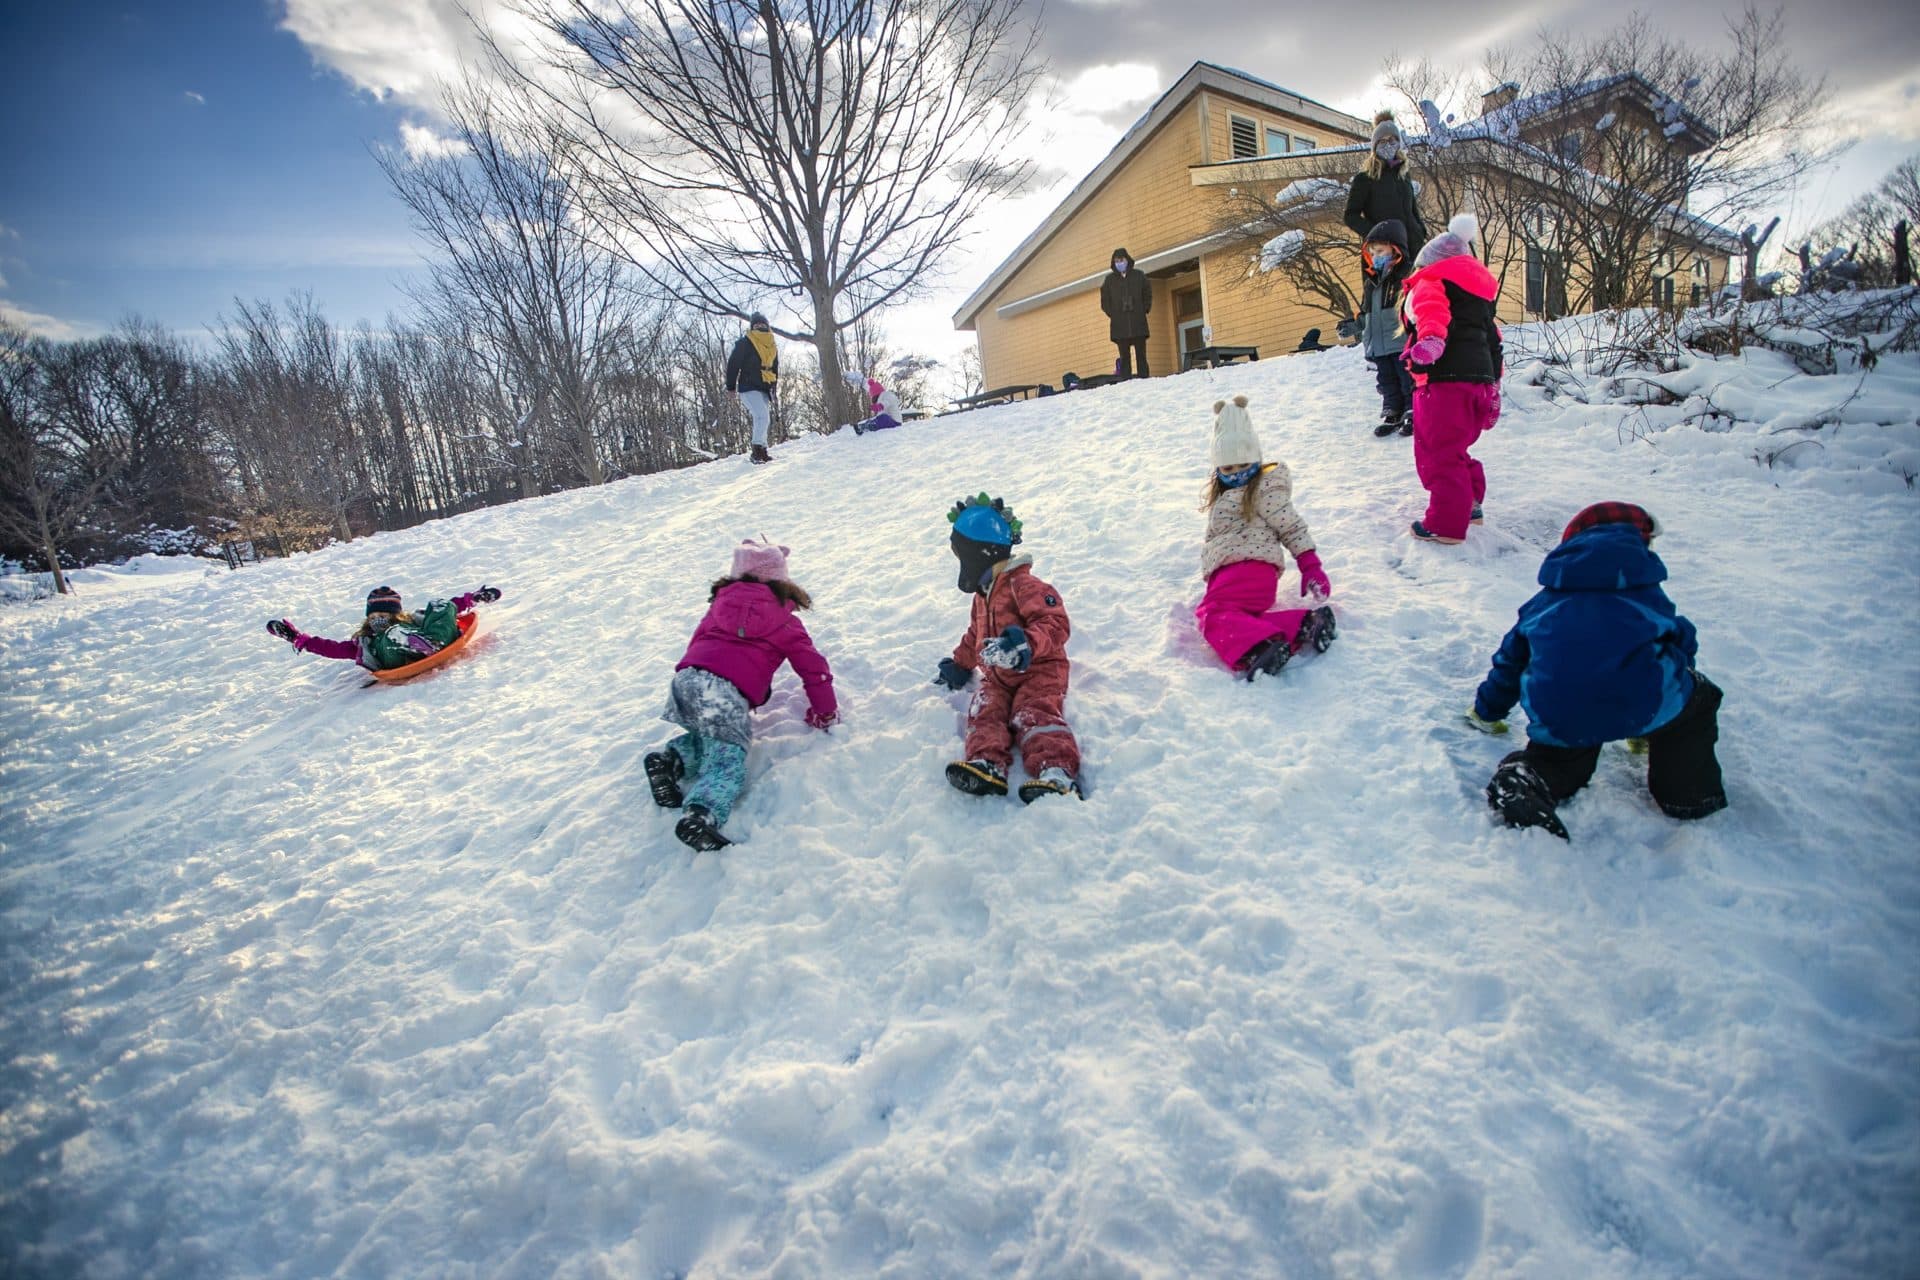 Children from the Audubon Boston Nature Center Preschool program play in the snow just before parents come to pick them up at the end of their day. (Jesse Costa/WBUR)